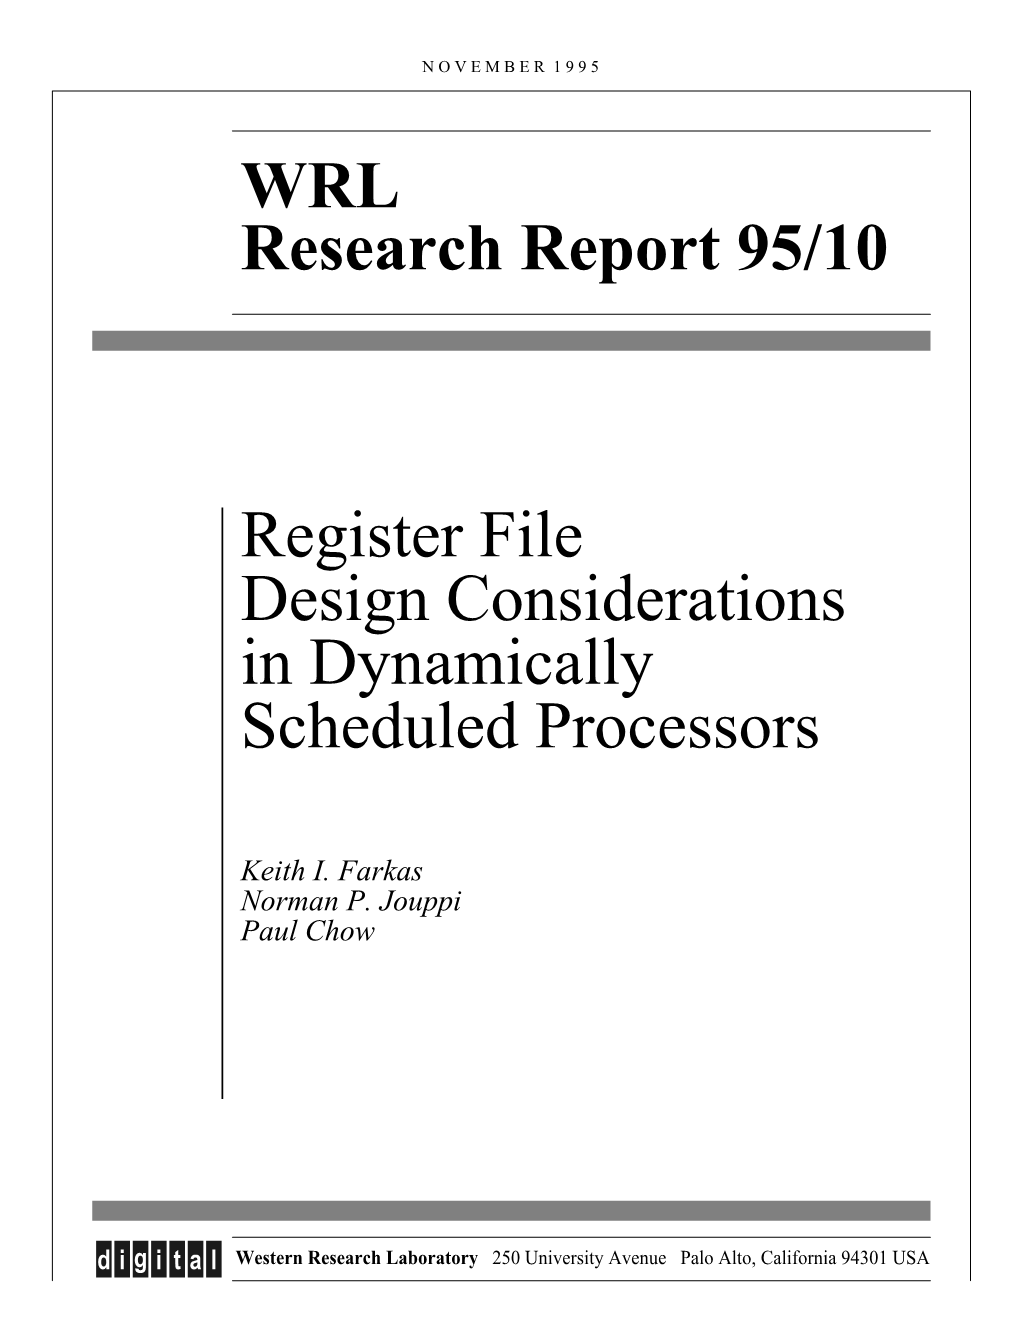 Register File Design Considerations in Dynamically Scheduled Processors